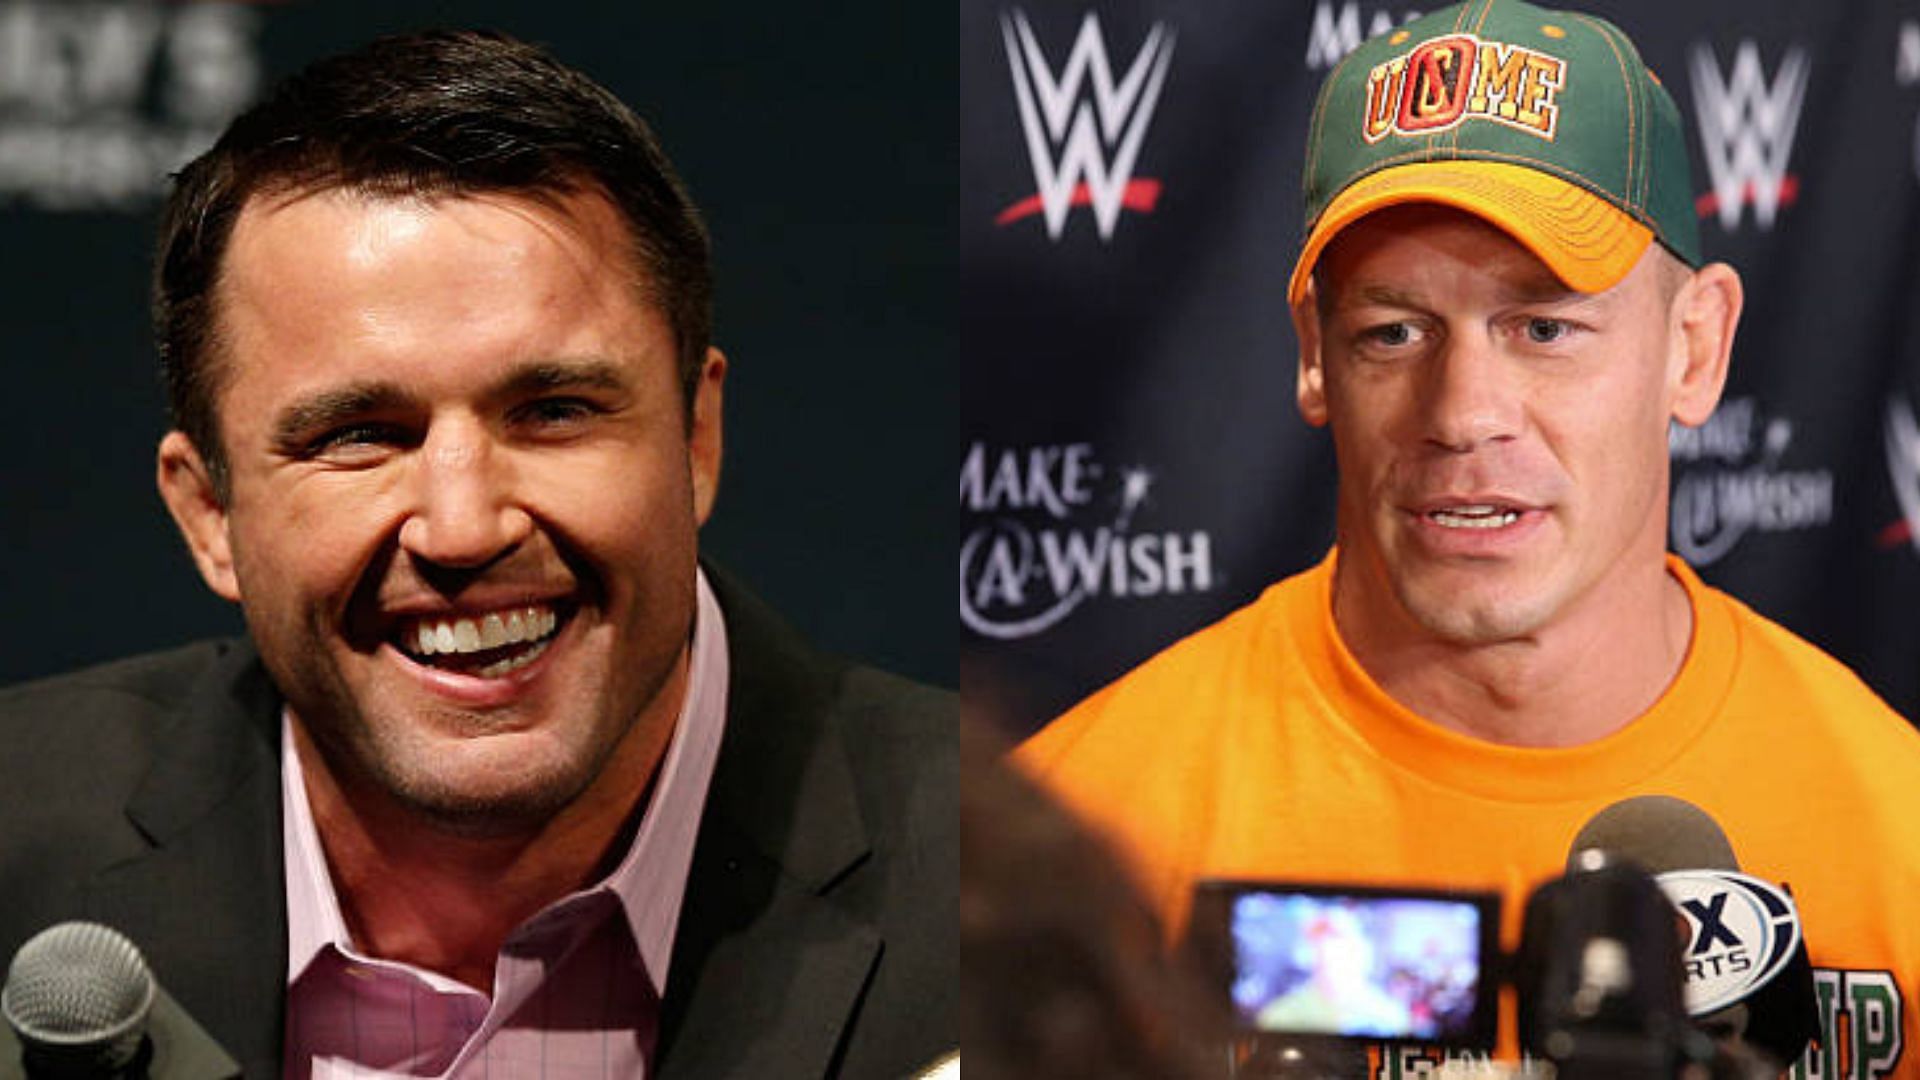 Chael Sonnen (L) is having a good time with former WWE Champion John Cena&#039;s tweets (R)